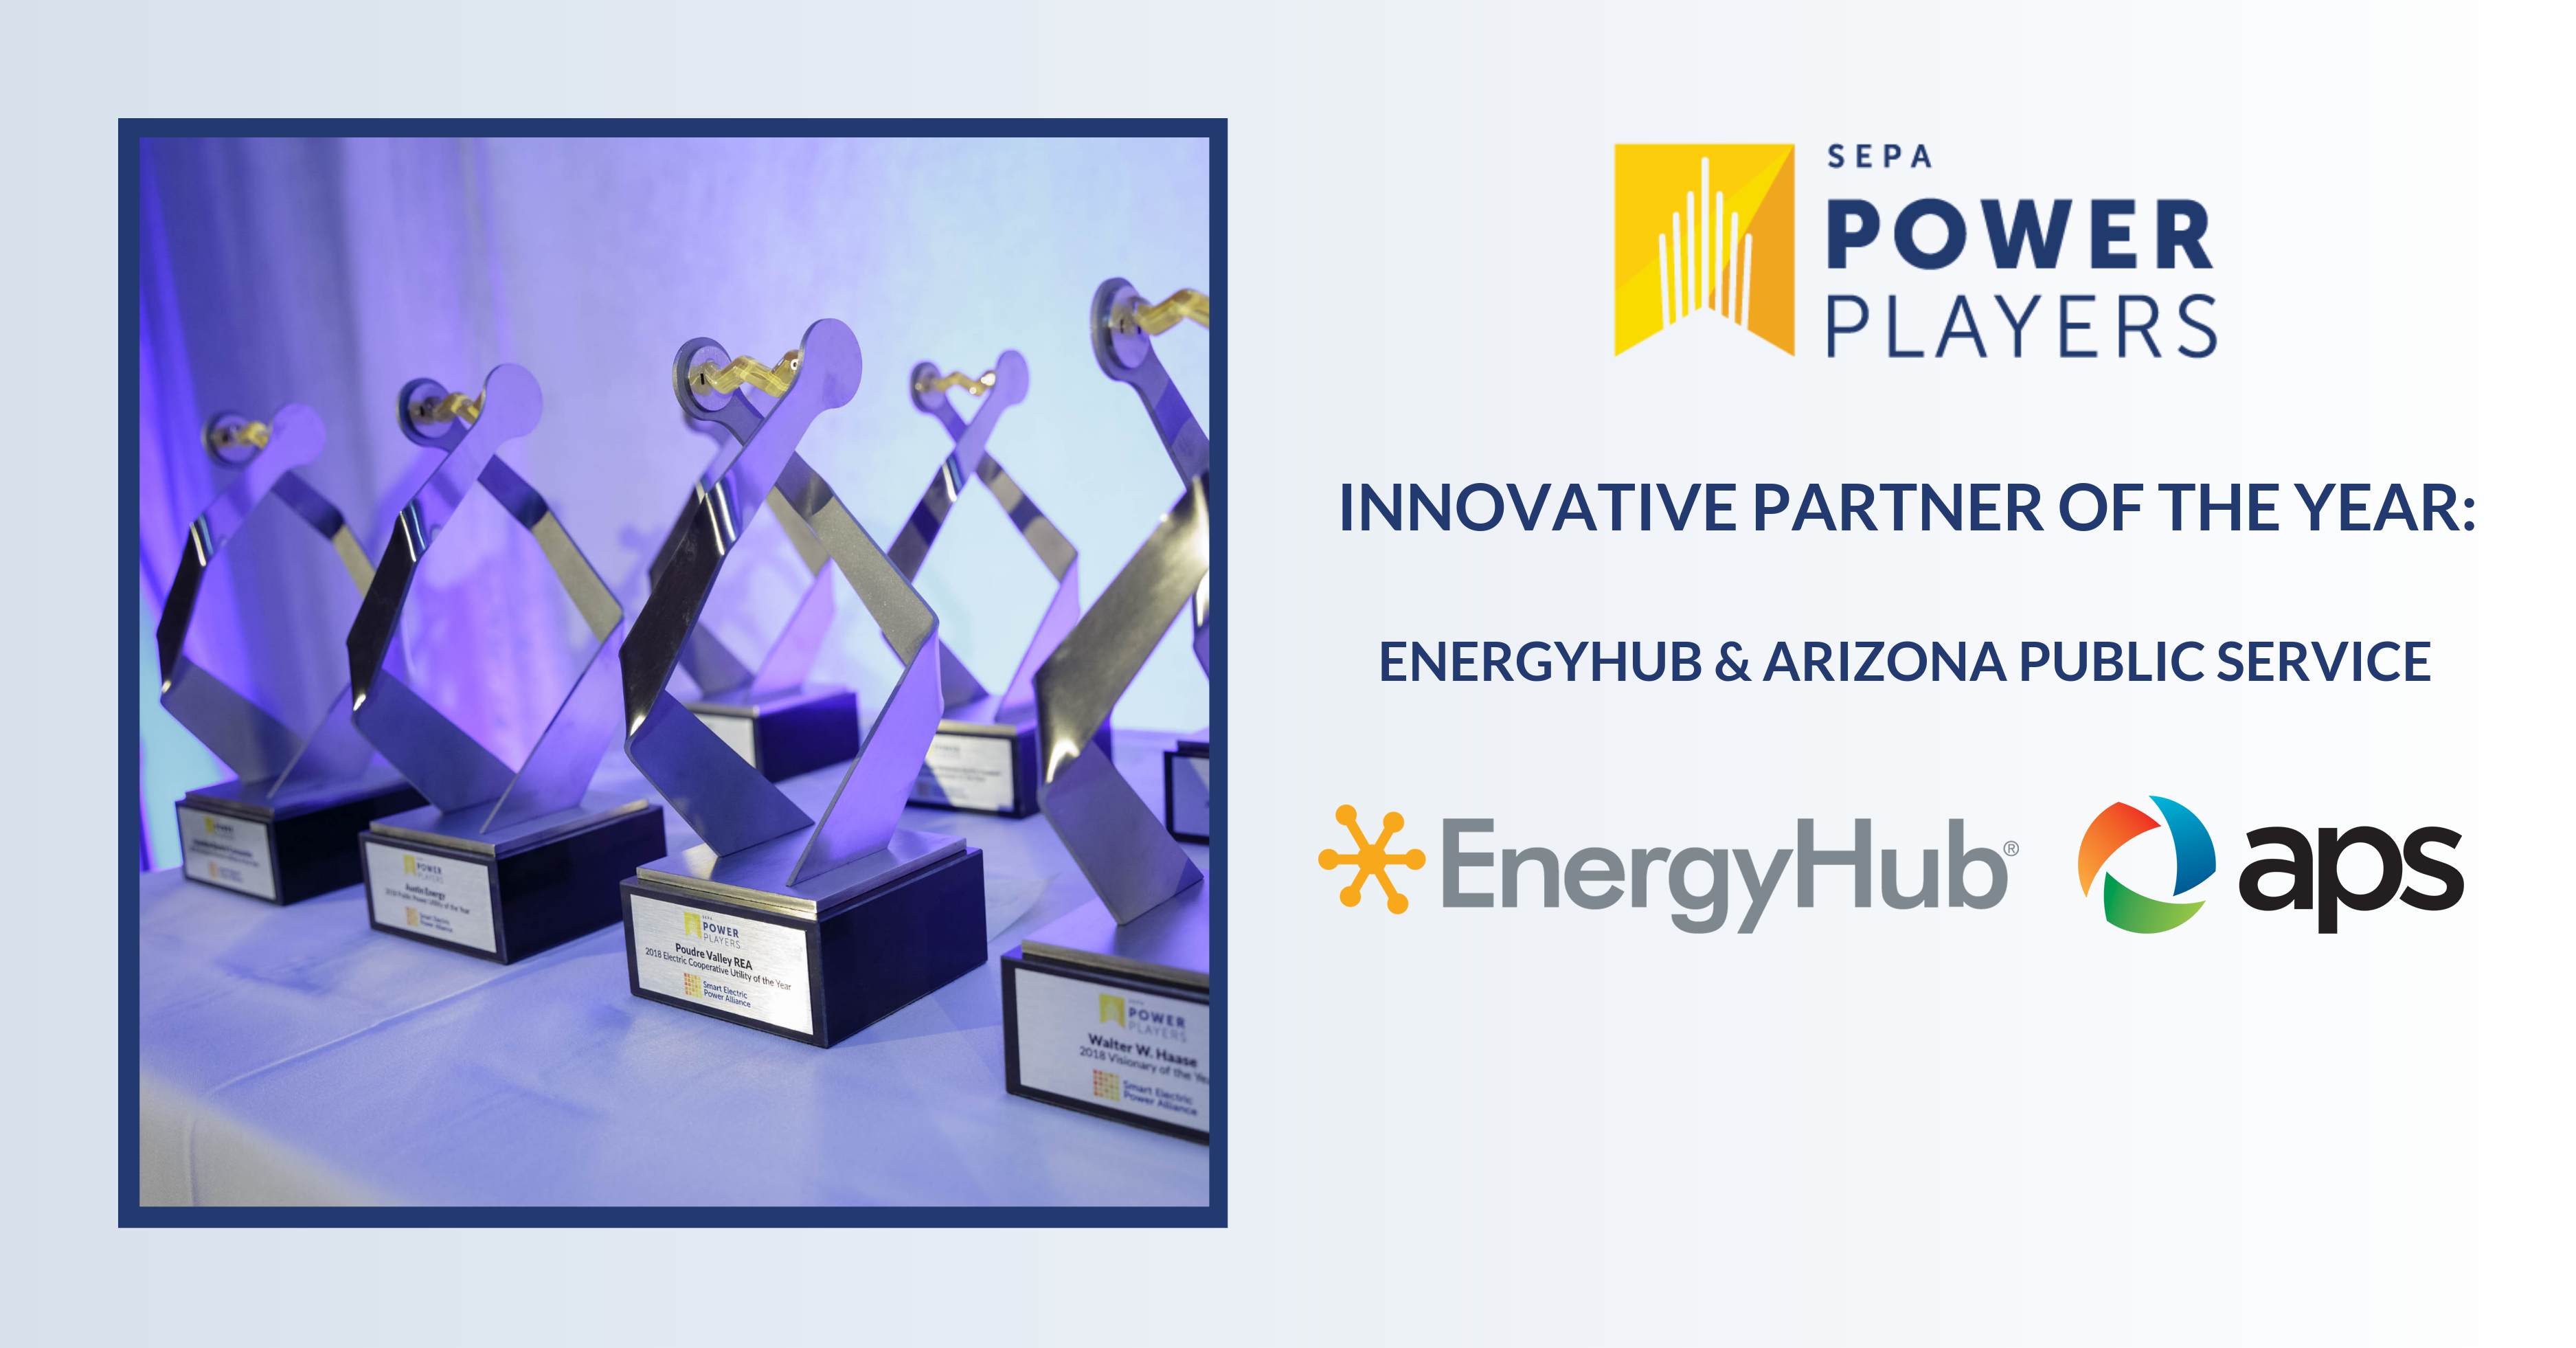 EnergyHub and Arizona Public Service named ‘Innovative Partners of the Year’ by SEPA